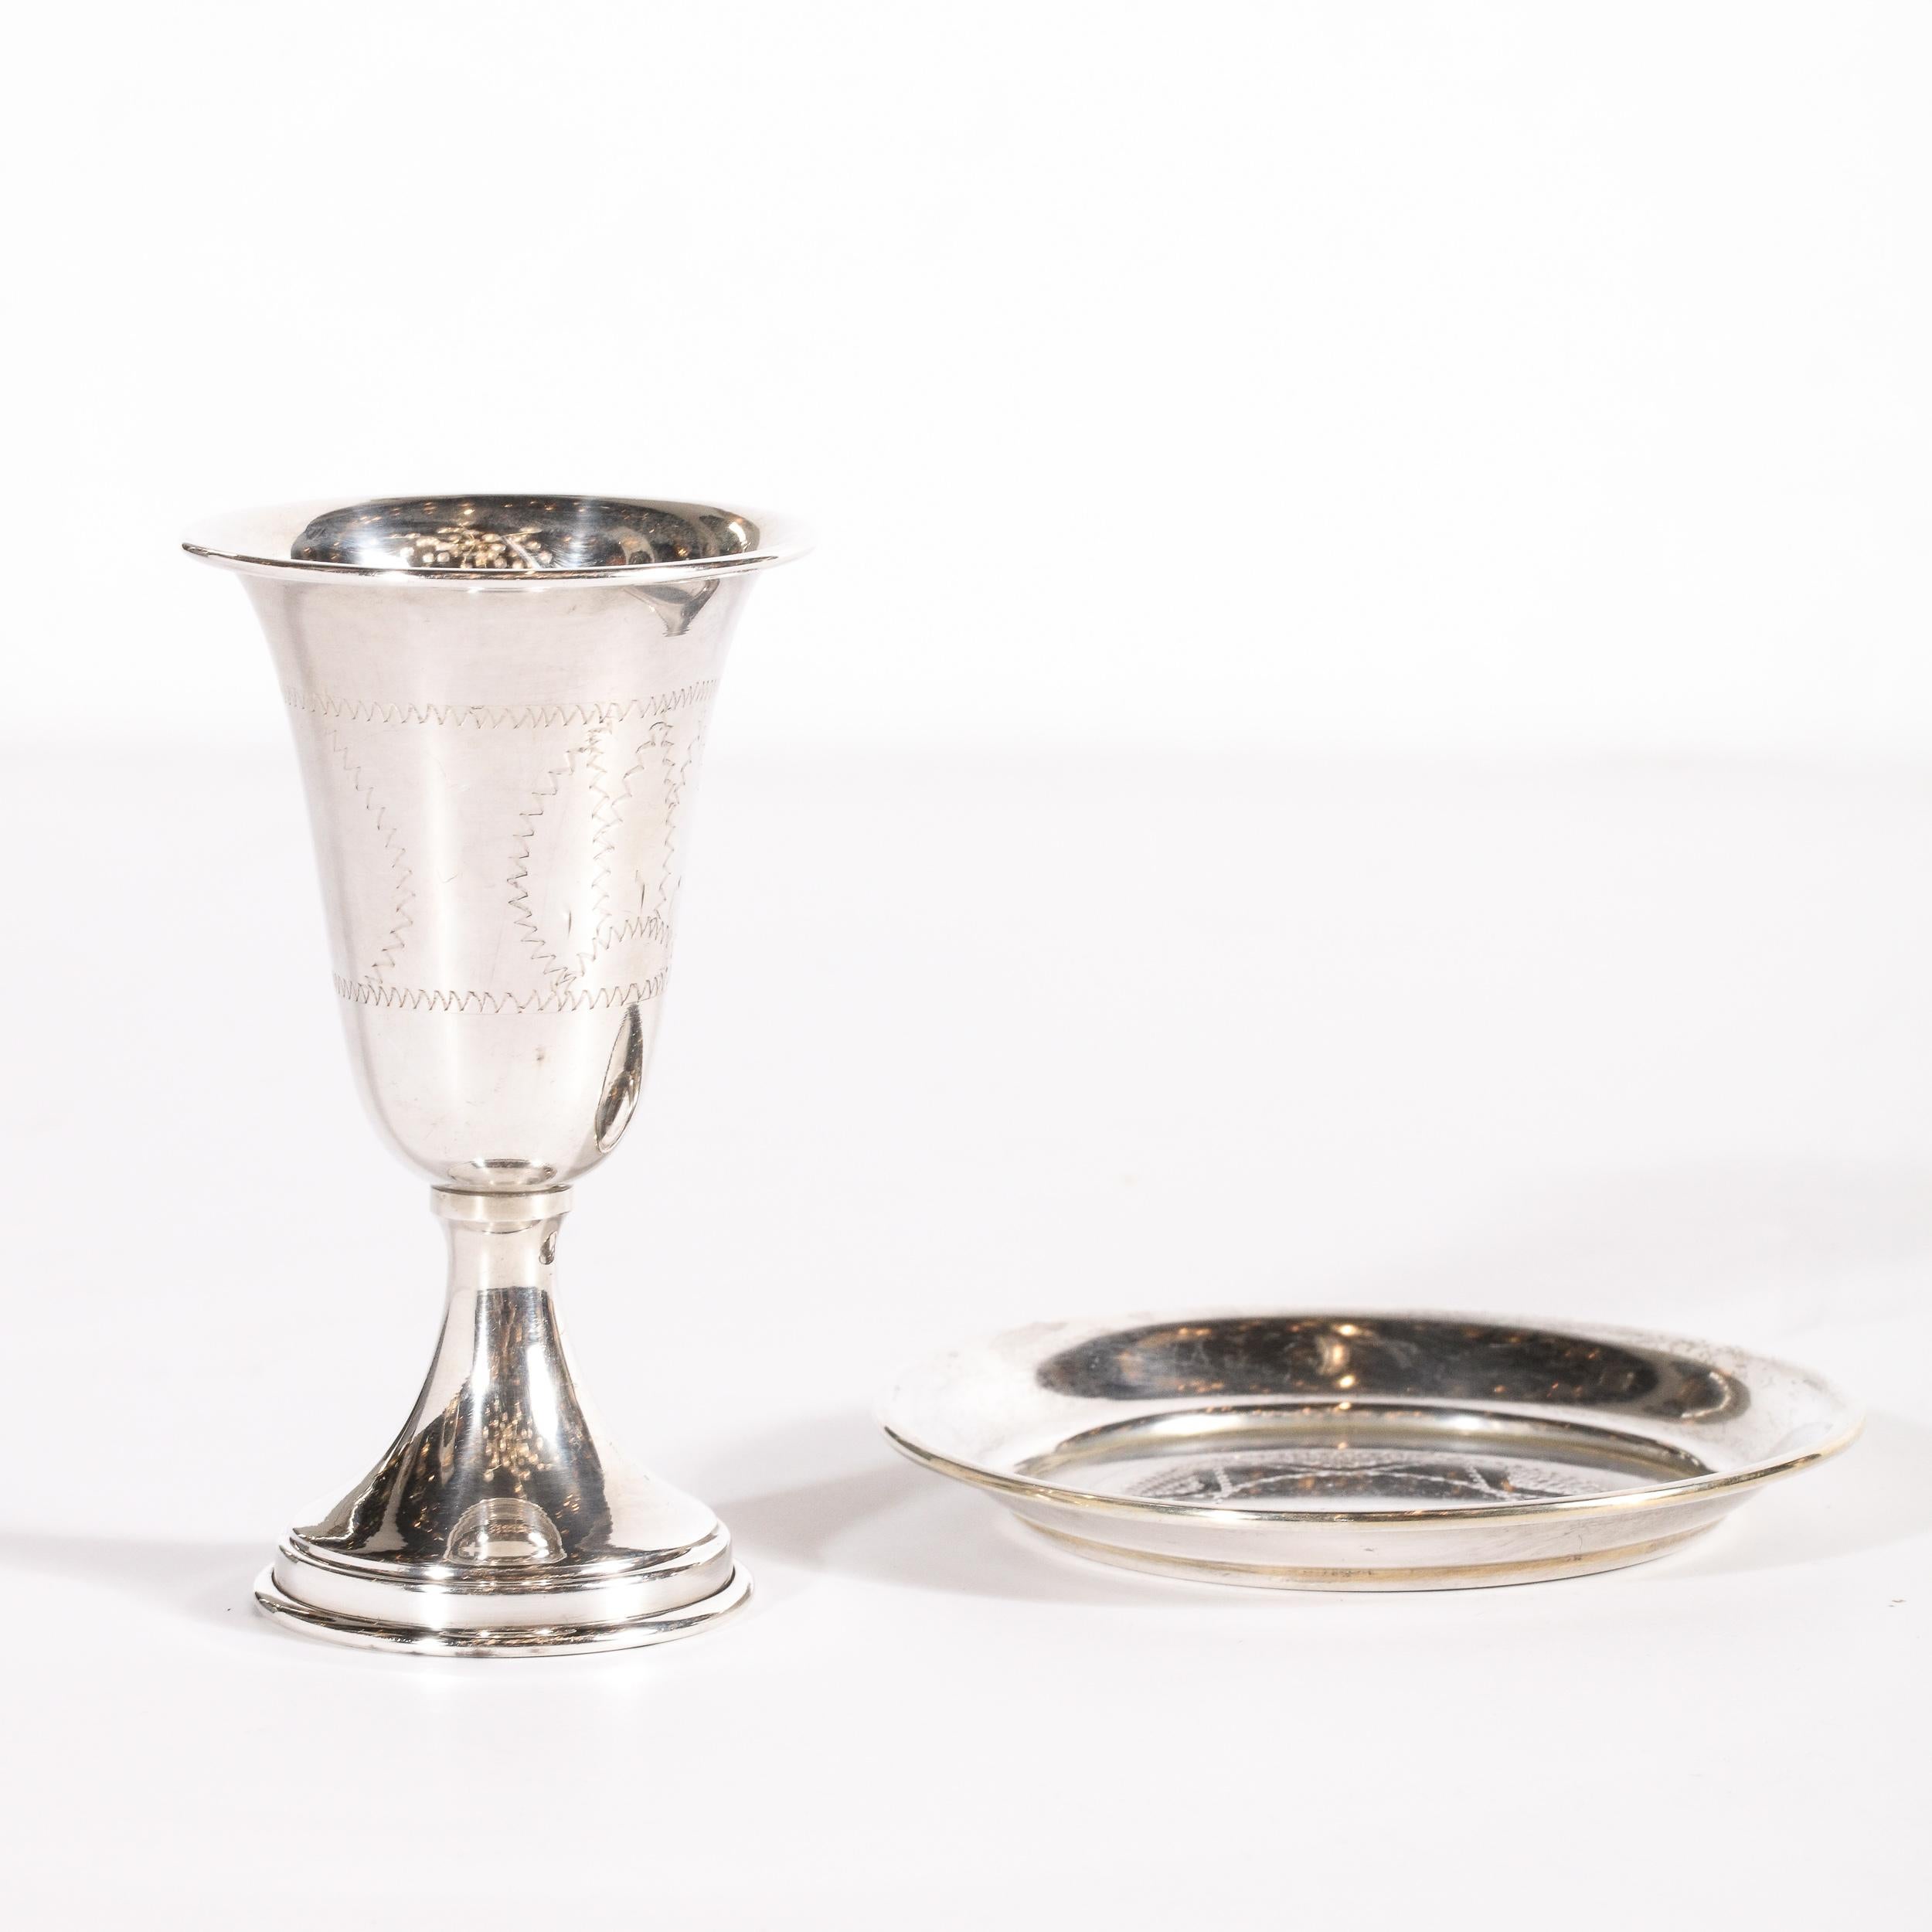 Eastern Sterling Company Sterling Silver Kiddush Goblet Cup & Charger 5